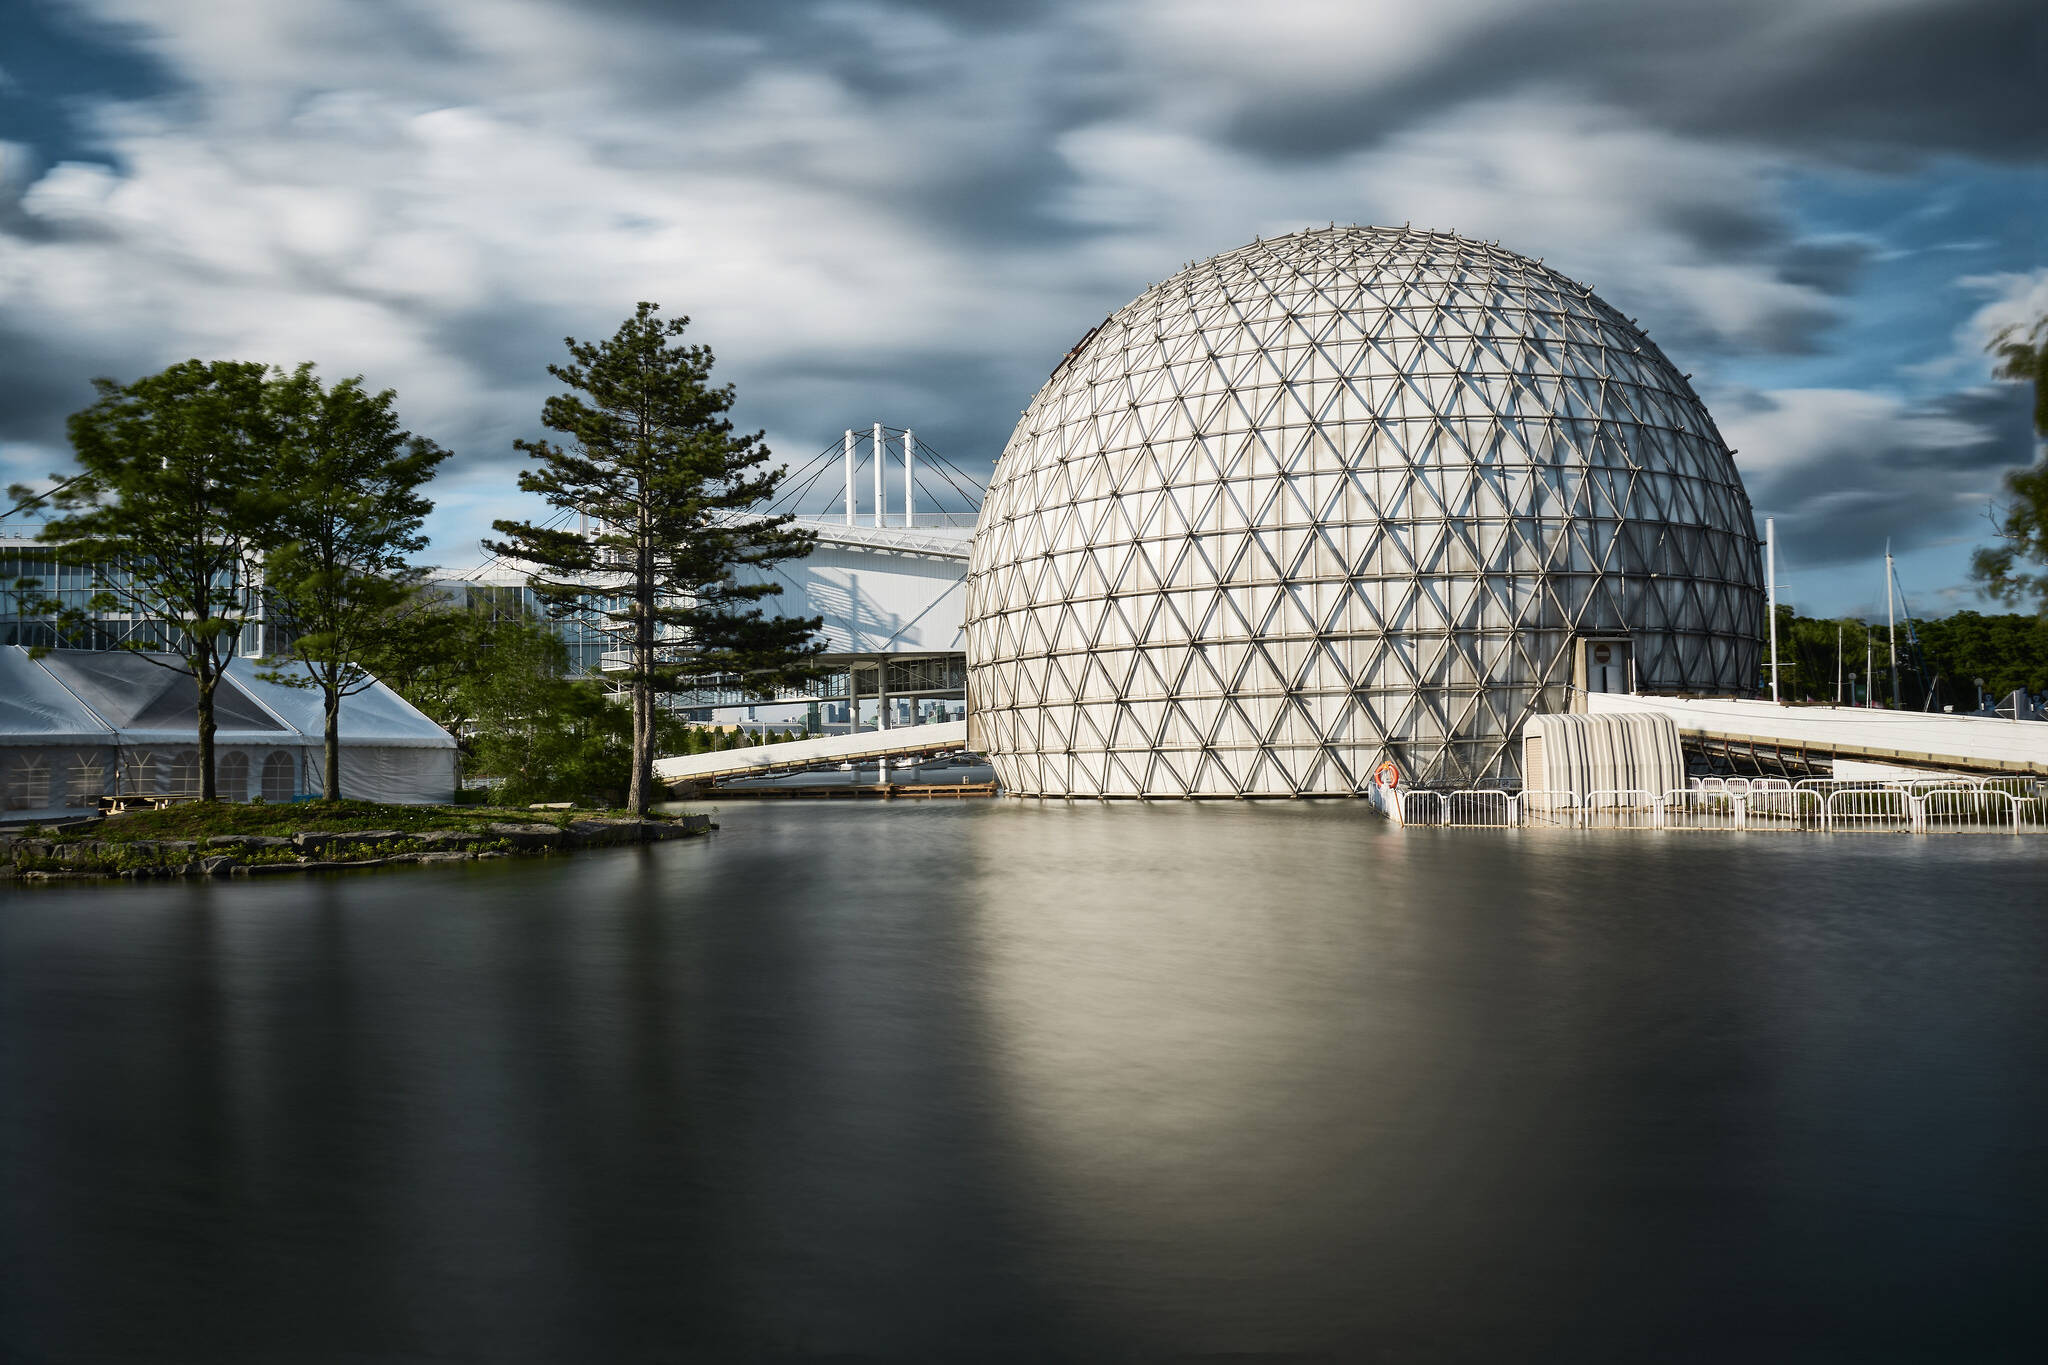 TIFF is reopening the Ontario Place Cinesphere